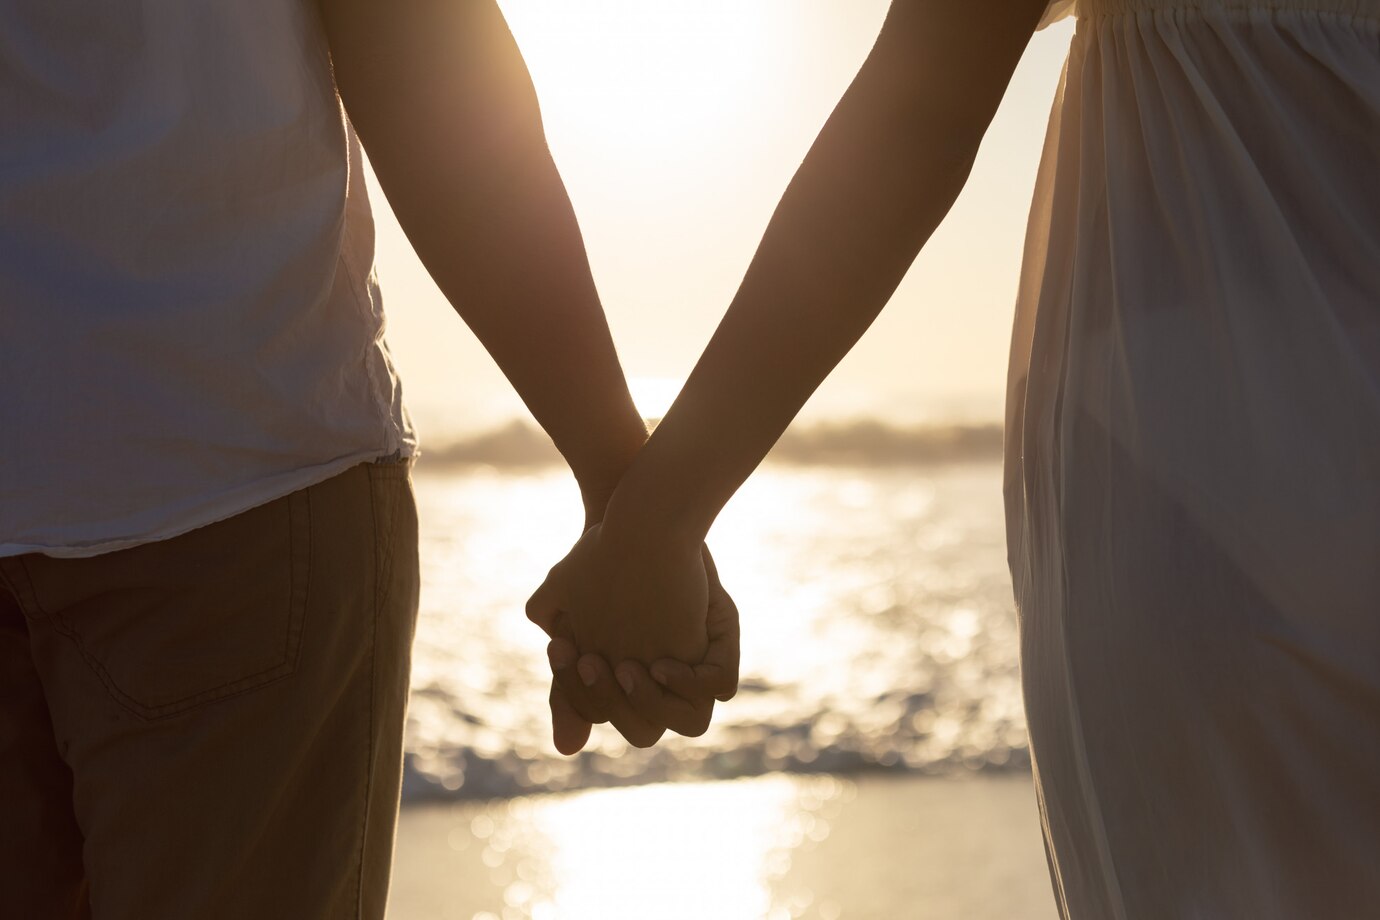 couple-standing-together-hand-hand-beach_107420-10016